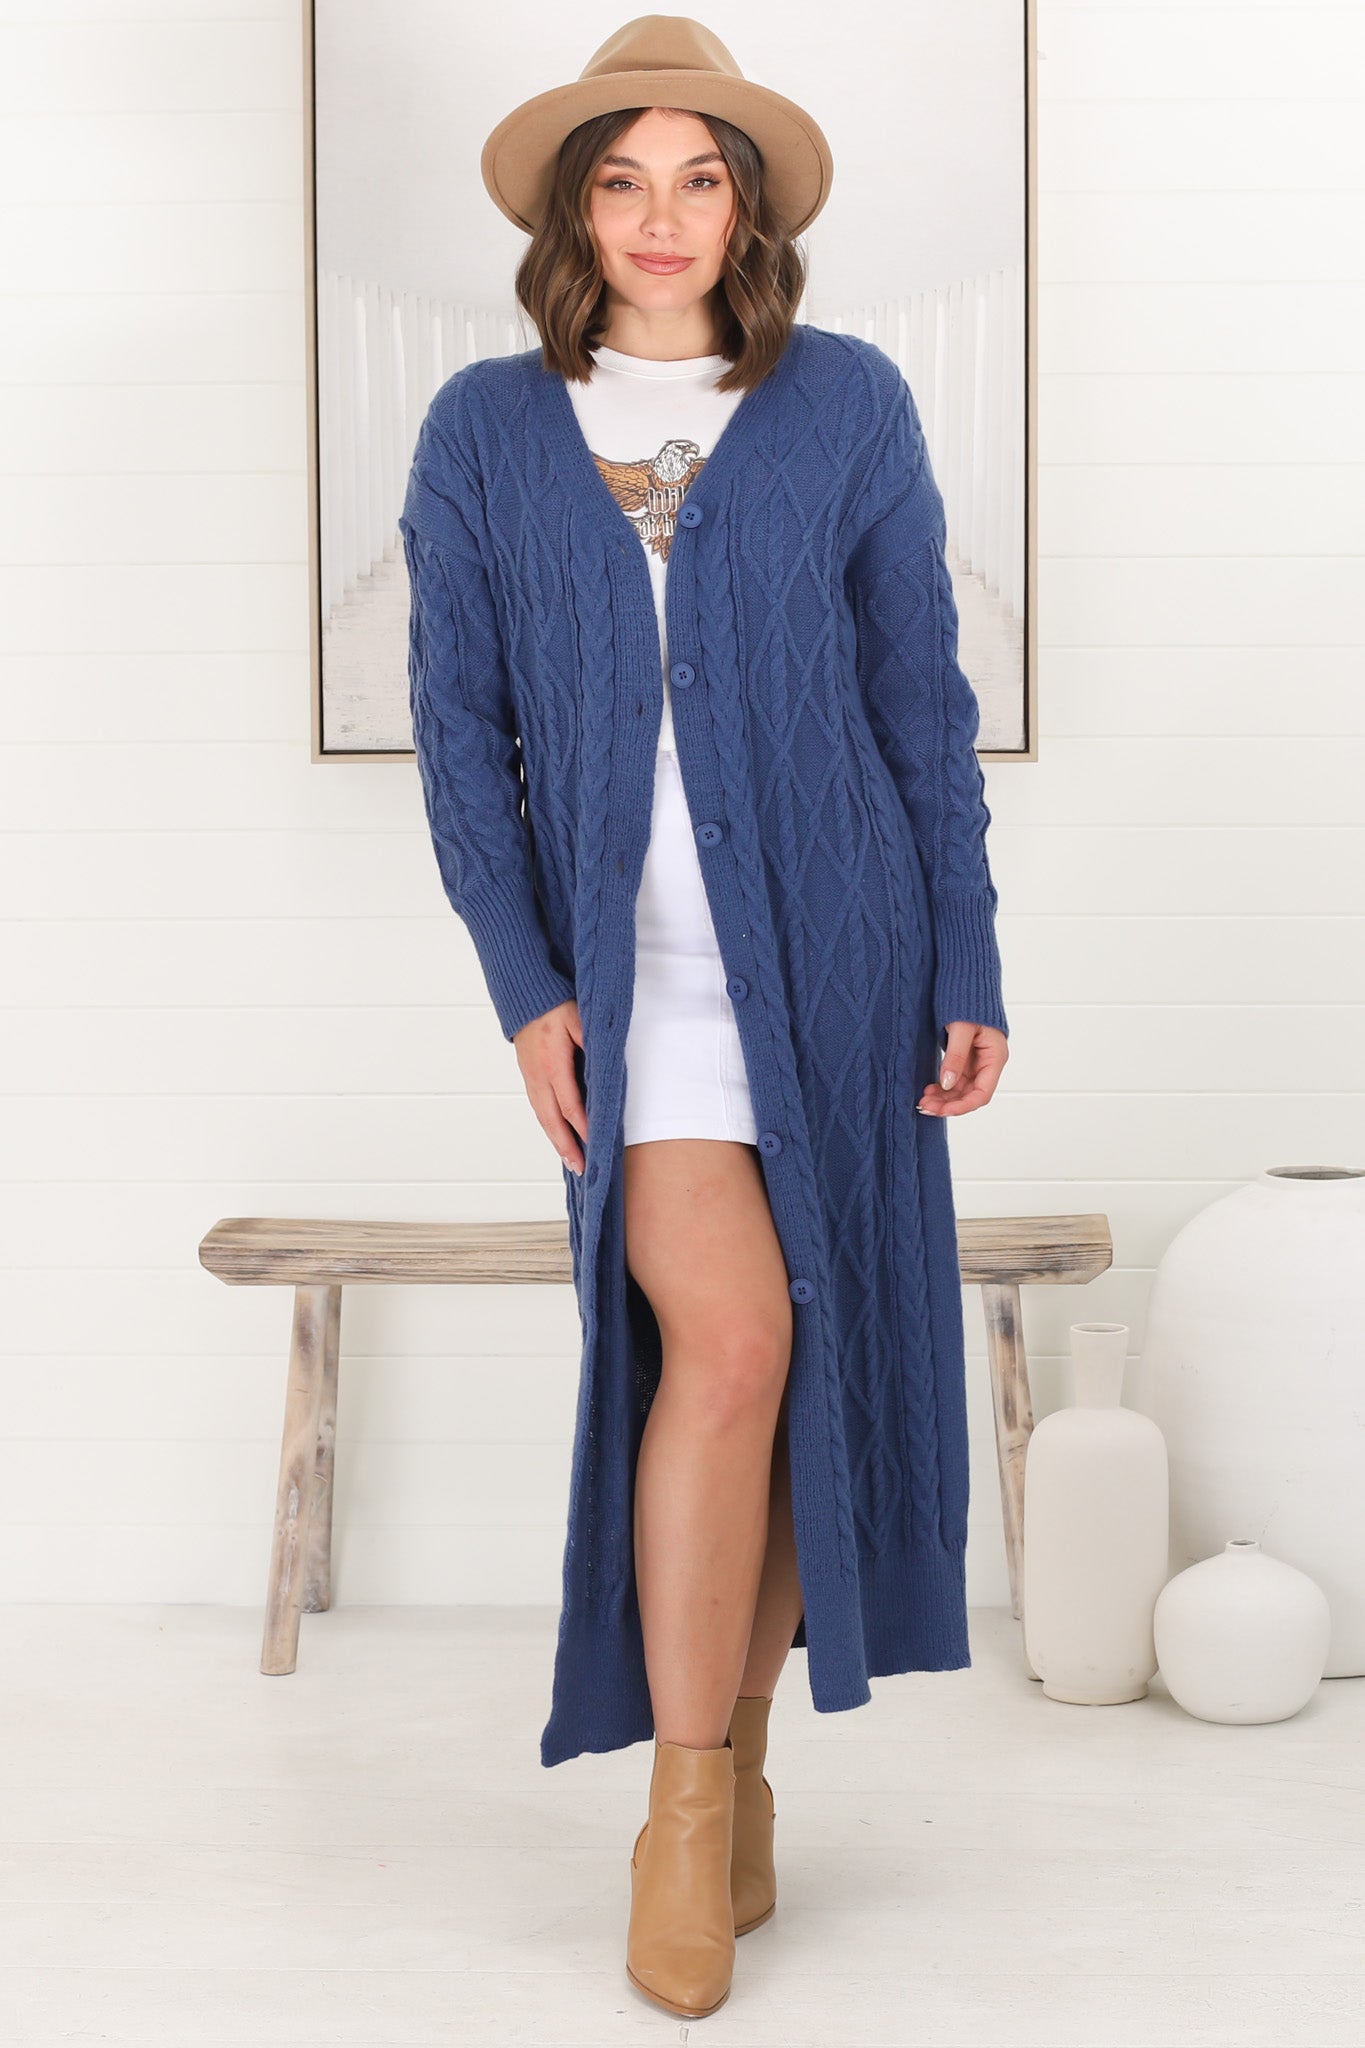 Tommy Cardigan - Long Line Cable Knit Cardigan in Denim Blue